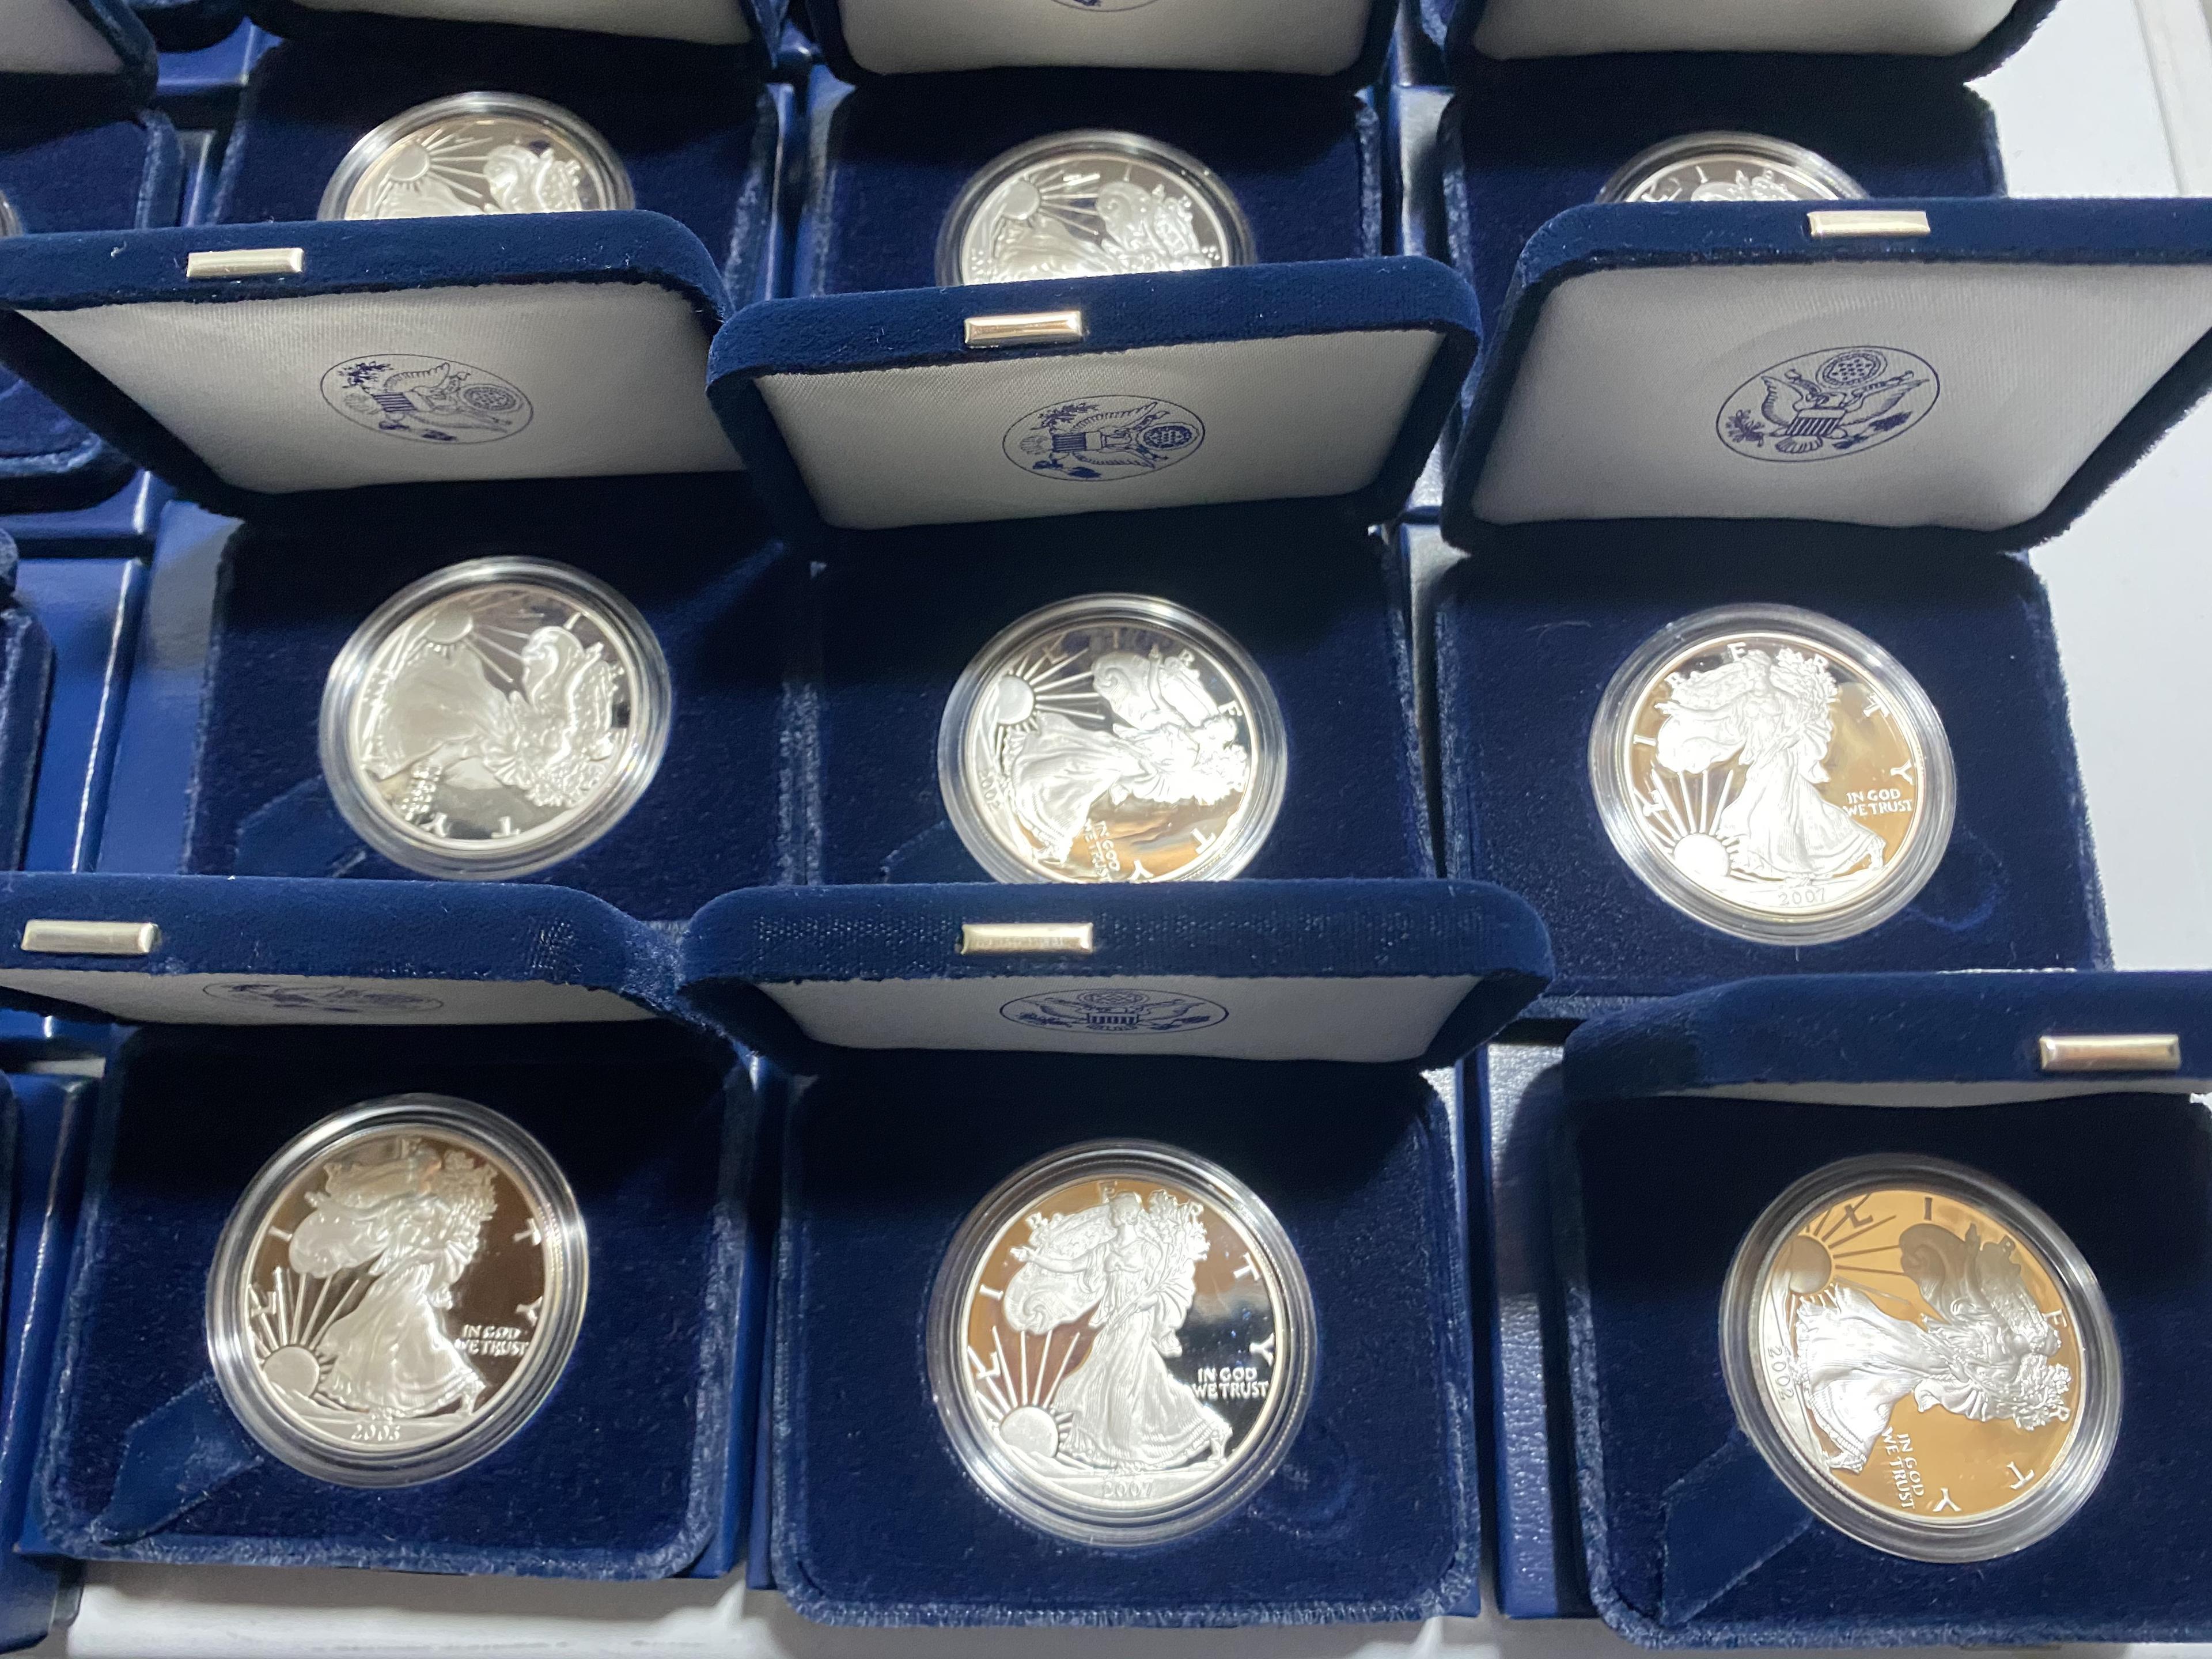 27 US Mint Silver Dollar Coins